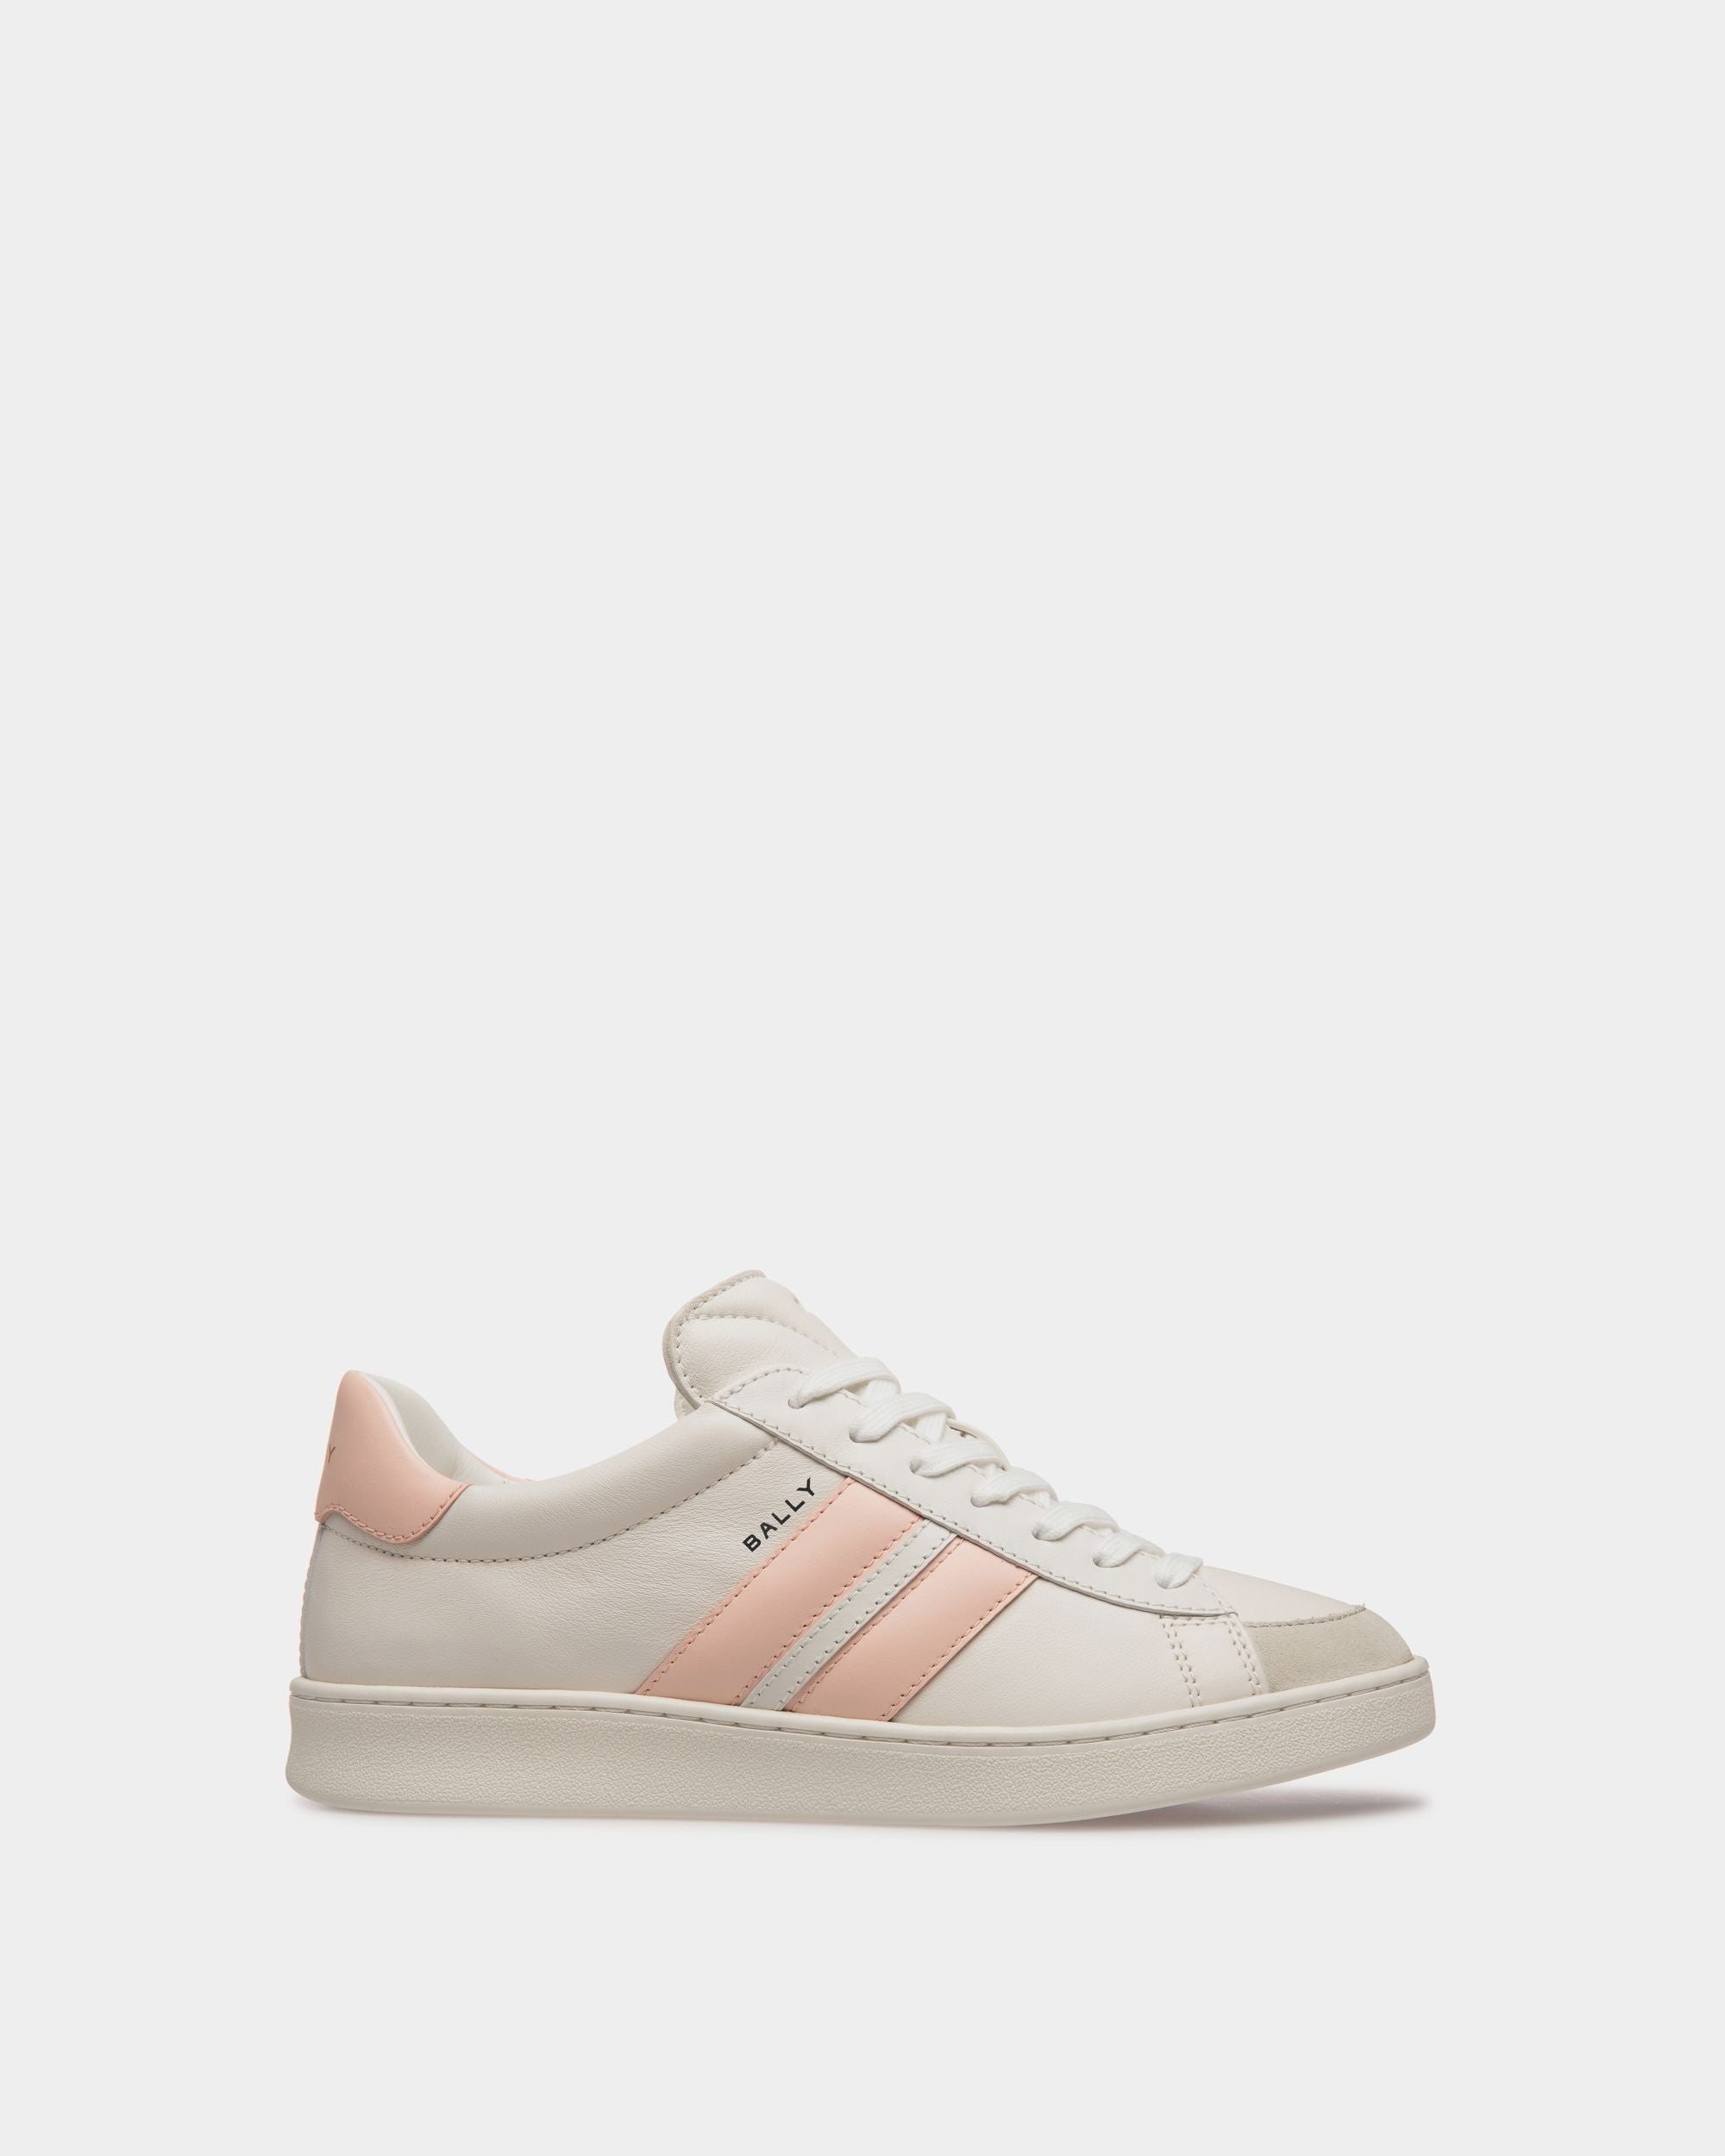 Women's Tennis Sneaker in White and Baby Pink Leather | Bally | Still Life Side